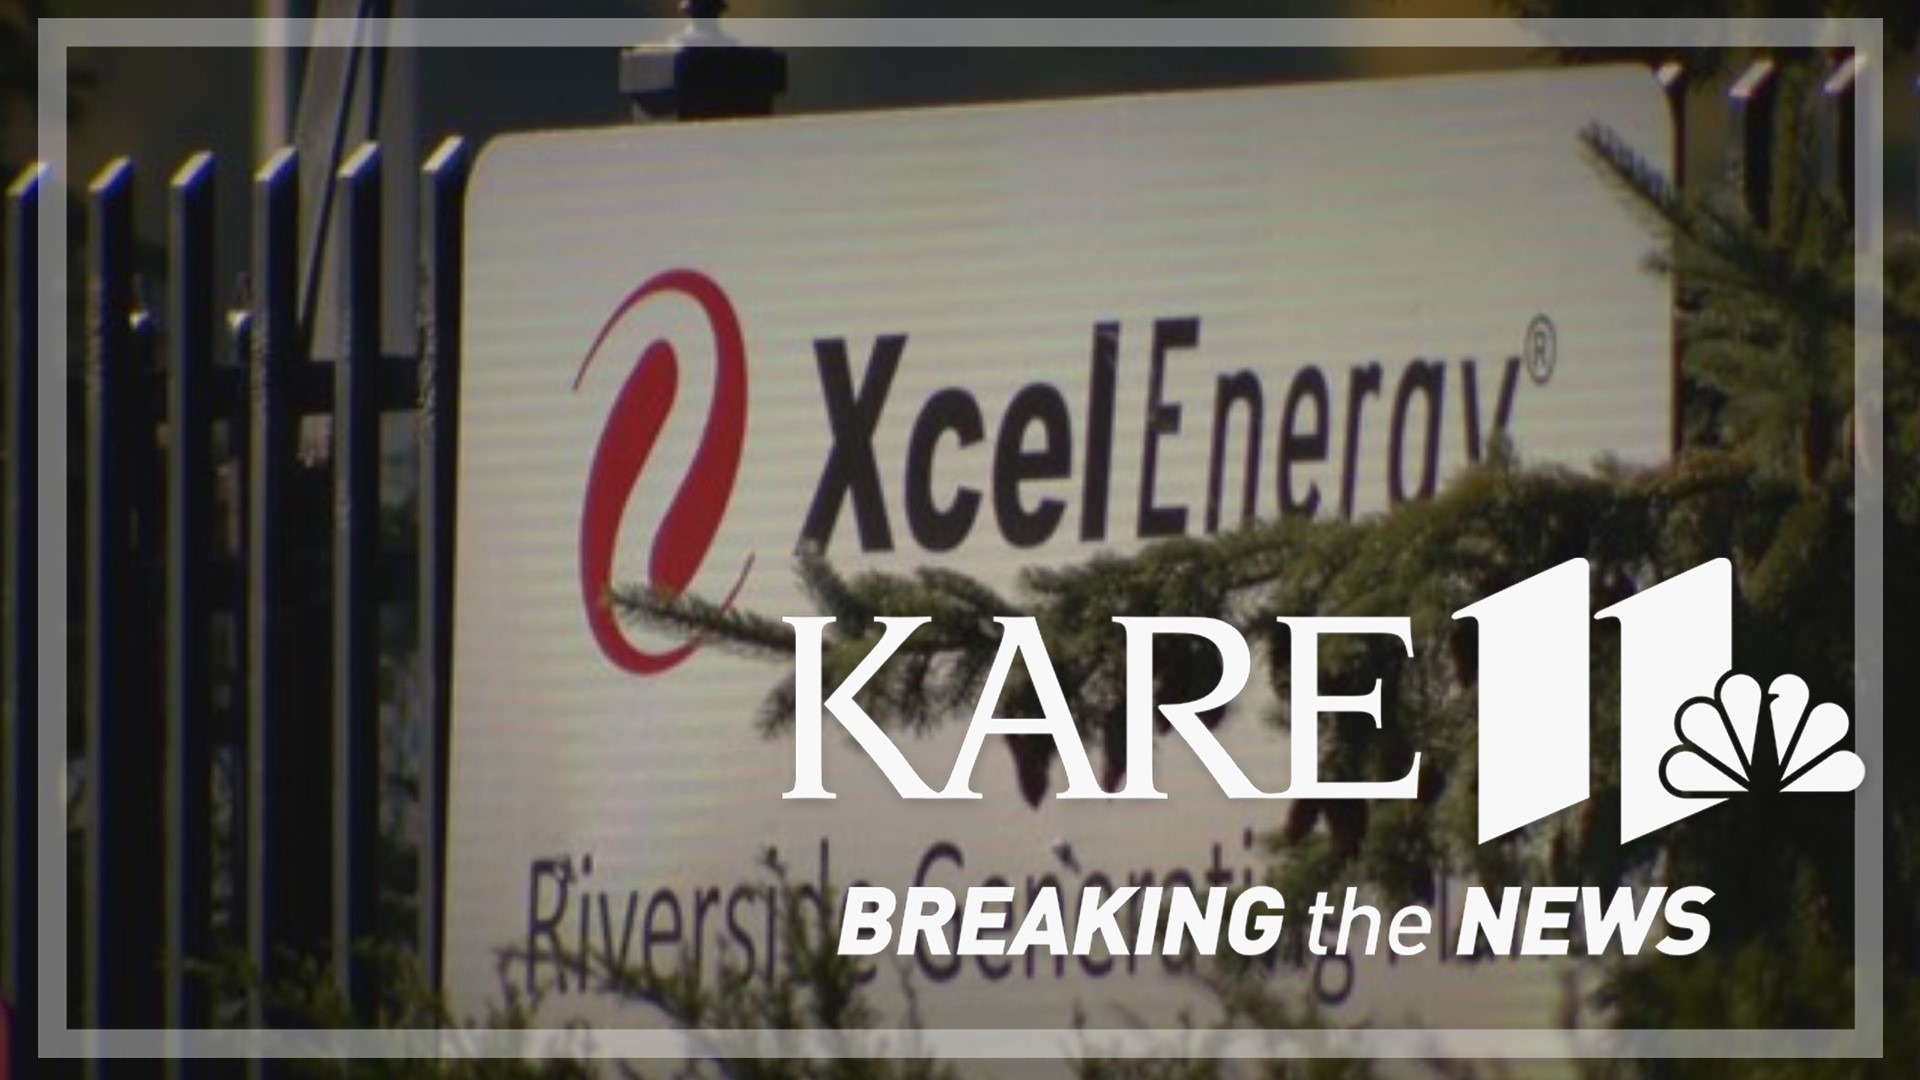 After receiving backlash from state agencies and customers, Xcel Energy withdrew its request to raise rates in 2023.